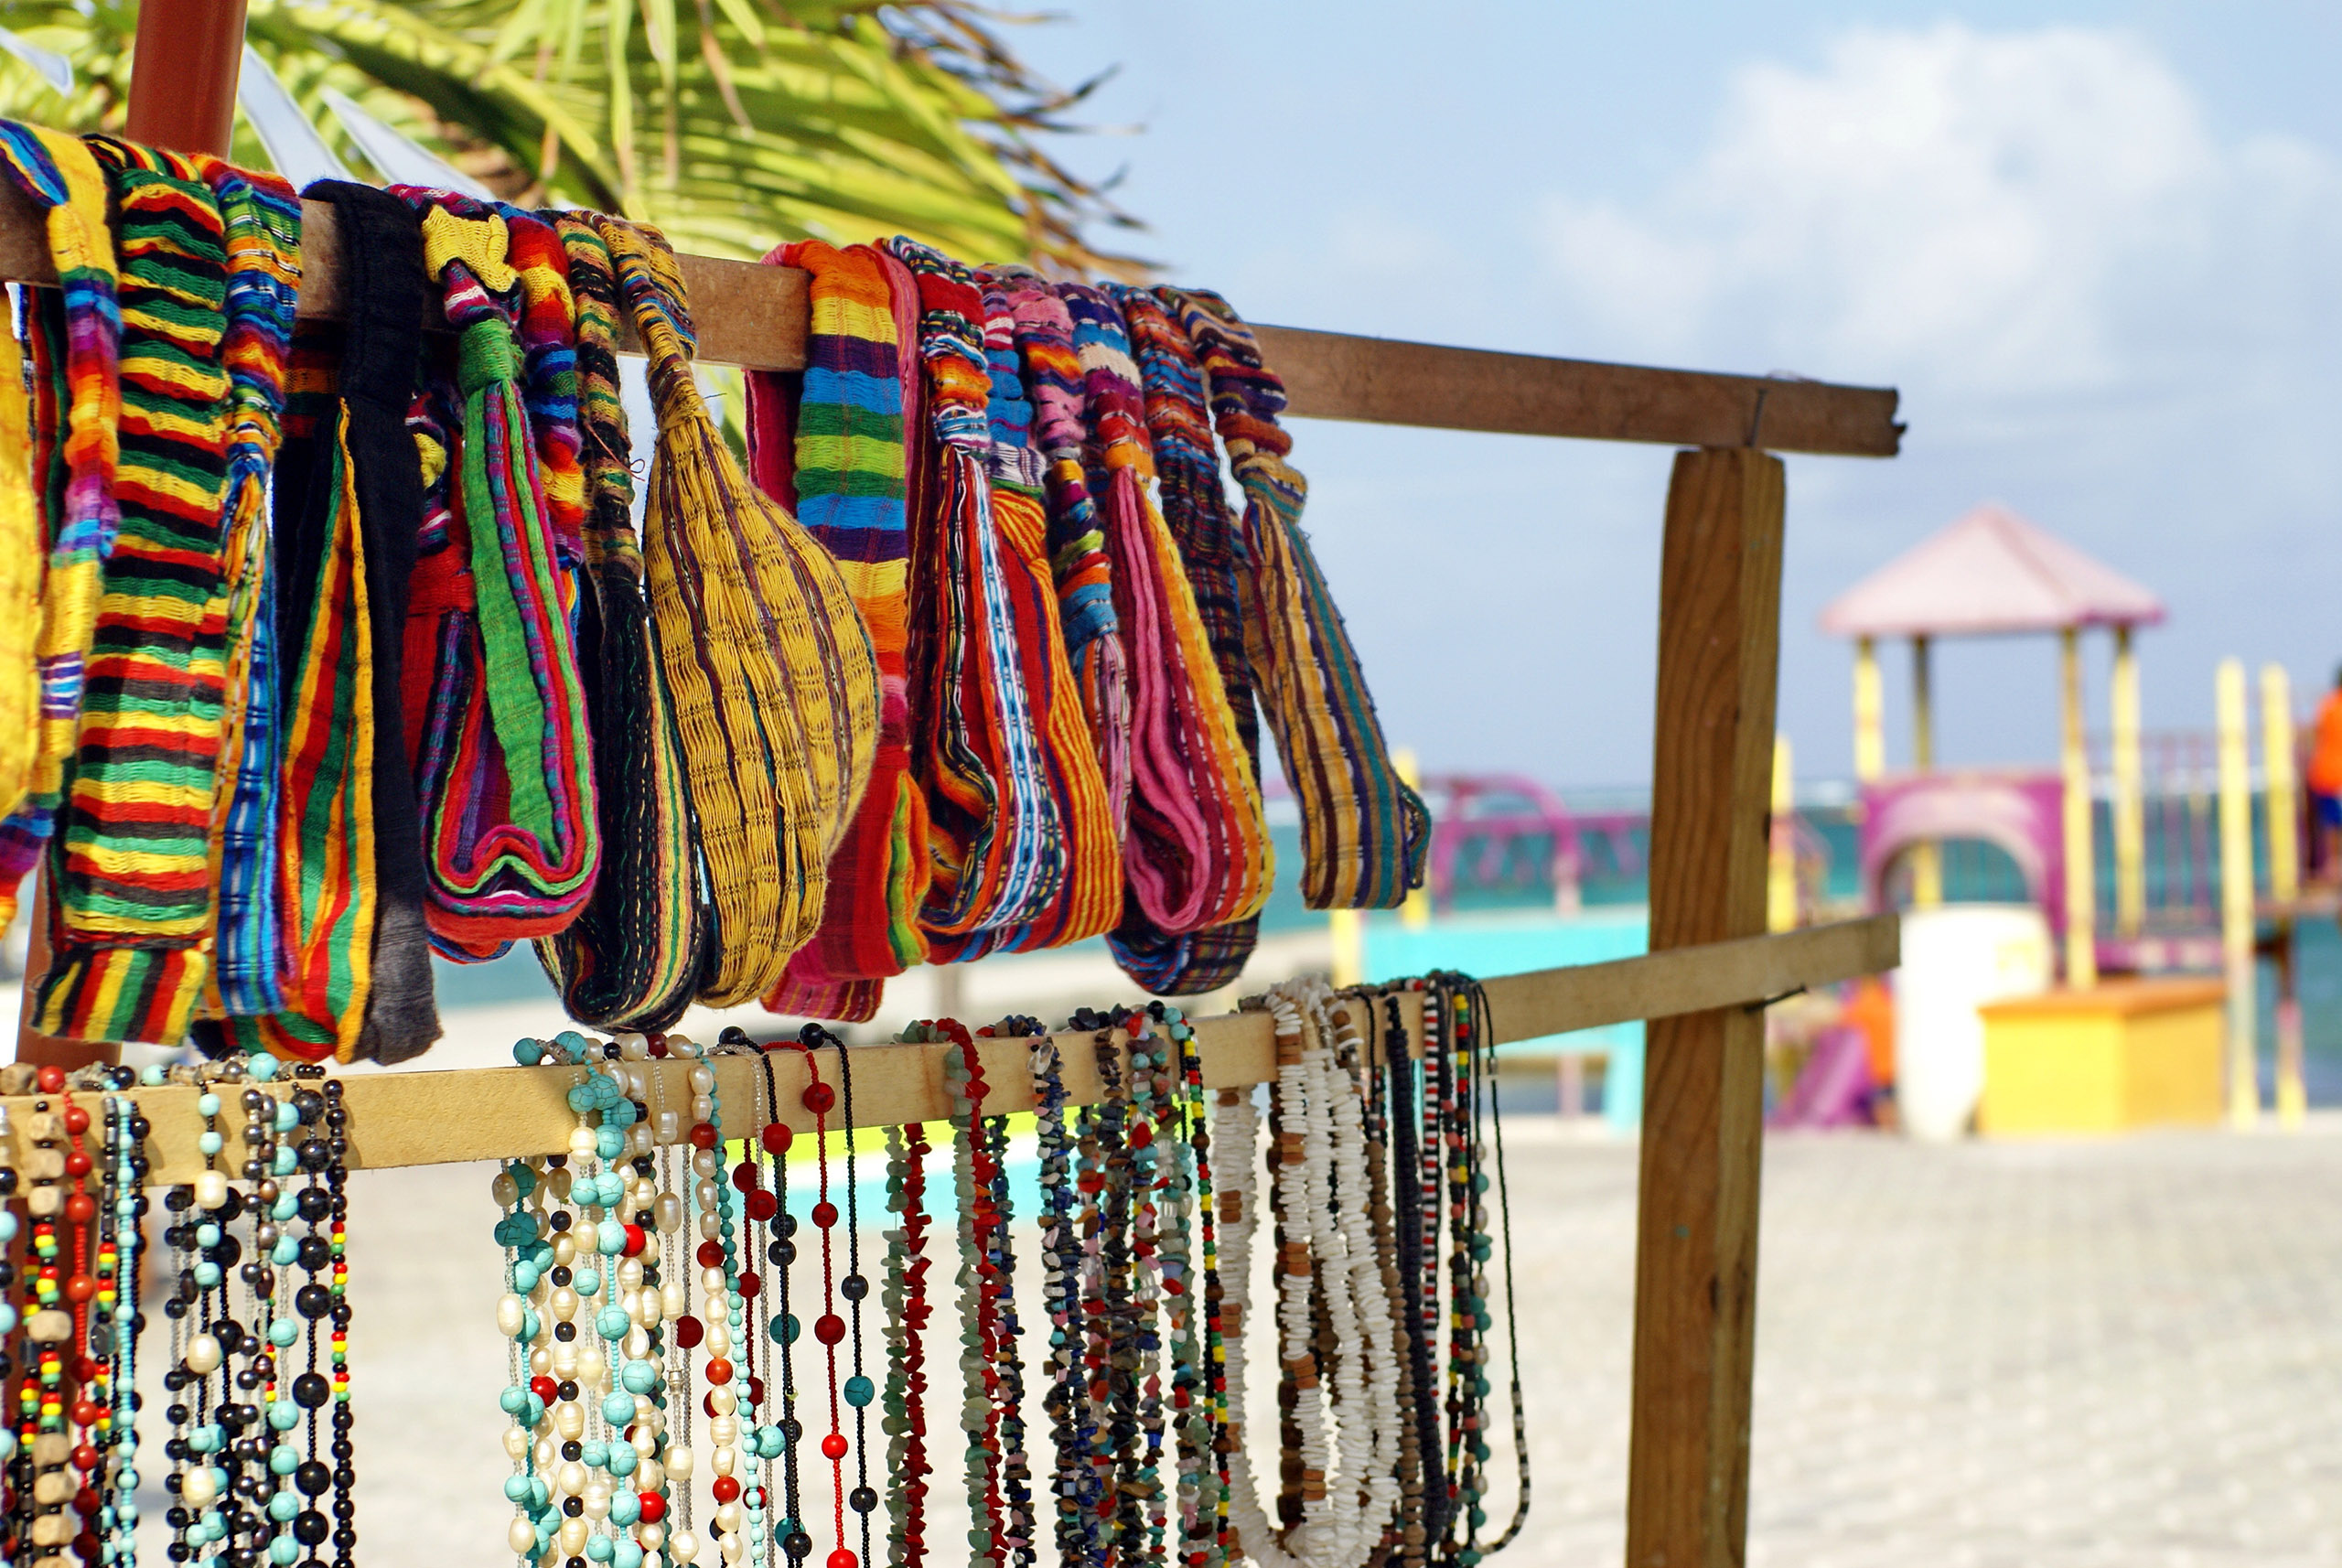 Hair ties and necklaces for sale at a souvenir stand in Ambergris Key, Belize